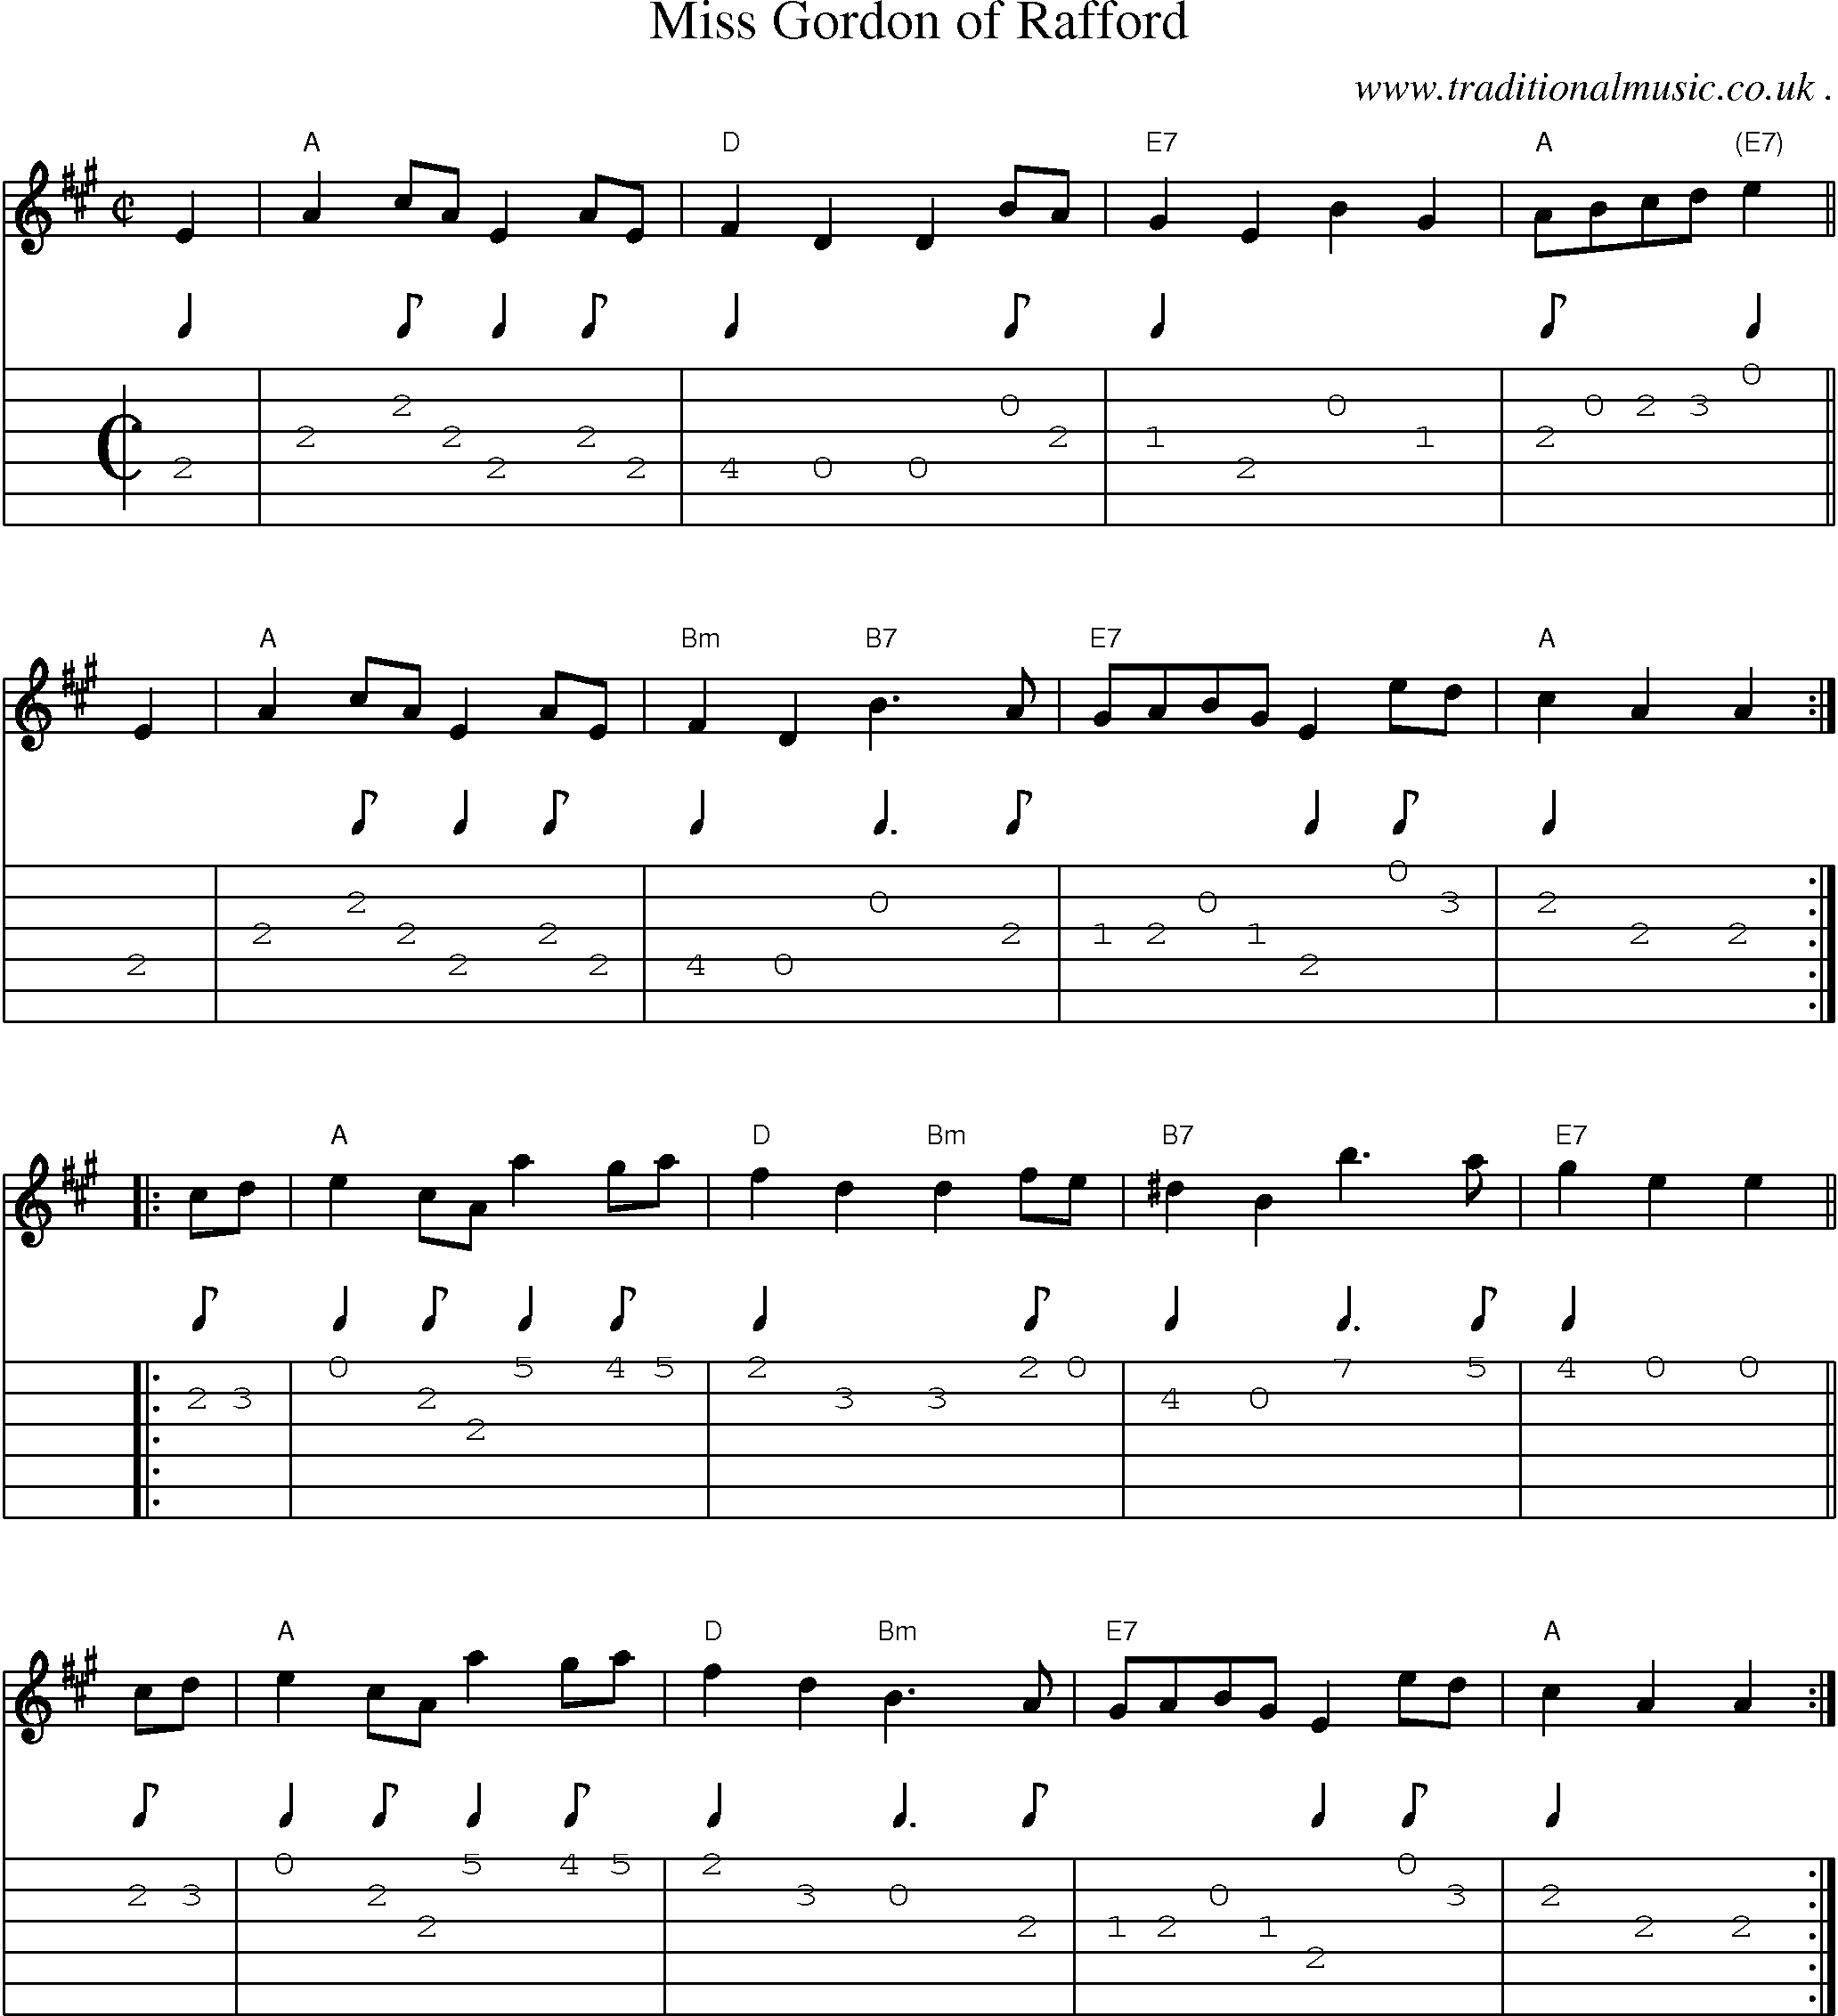 Sheet-music  score, Chords and Guitar Tabs for Miss Gordon Of Rafford